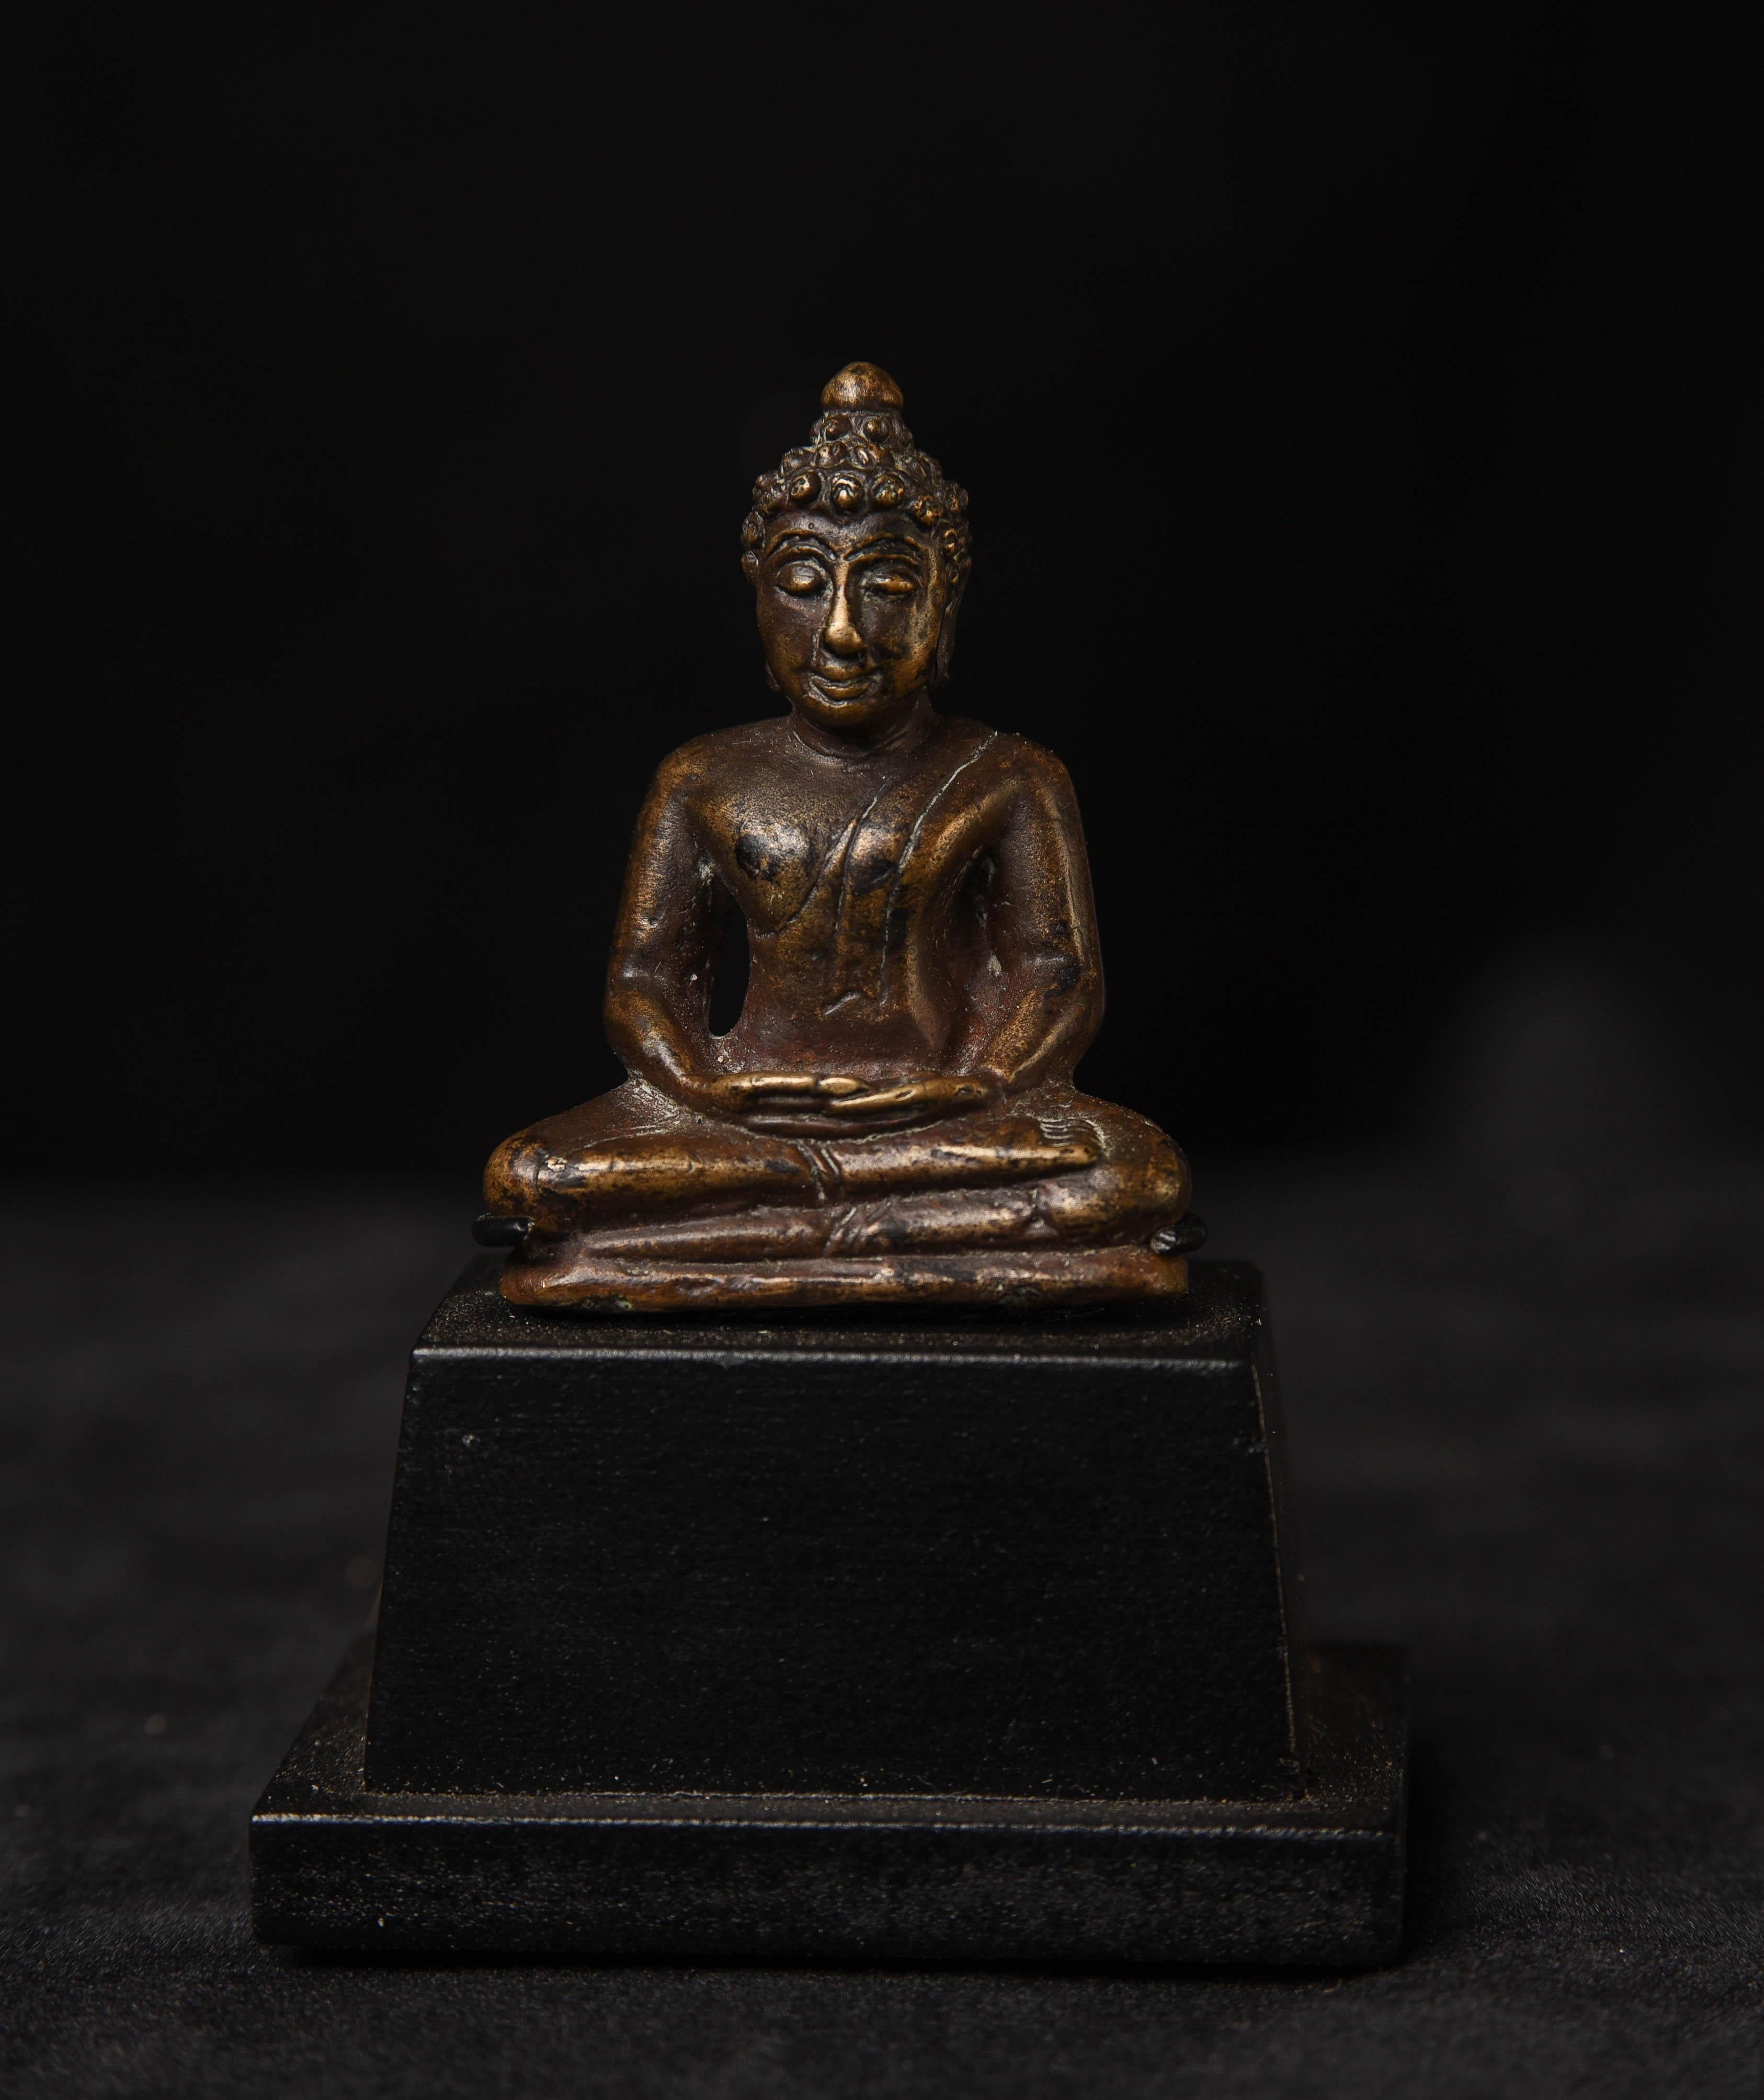 Superb 19/20thC (or possibly earlier) Thai solid cast bronze Buddha. Very hard to date this type, but probably close to 100 years old.  It was sold to me as being from the eighteenth century, but with it being of a soft alloy and without a clay core